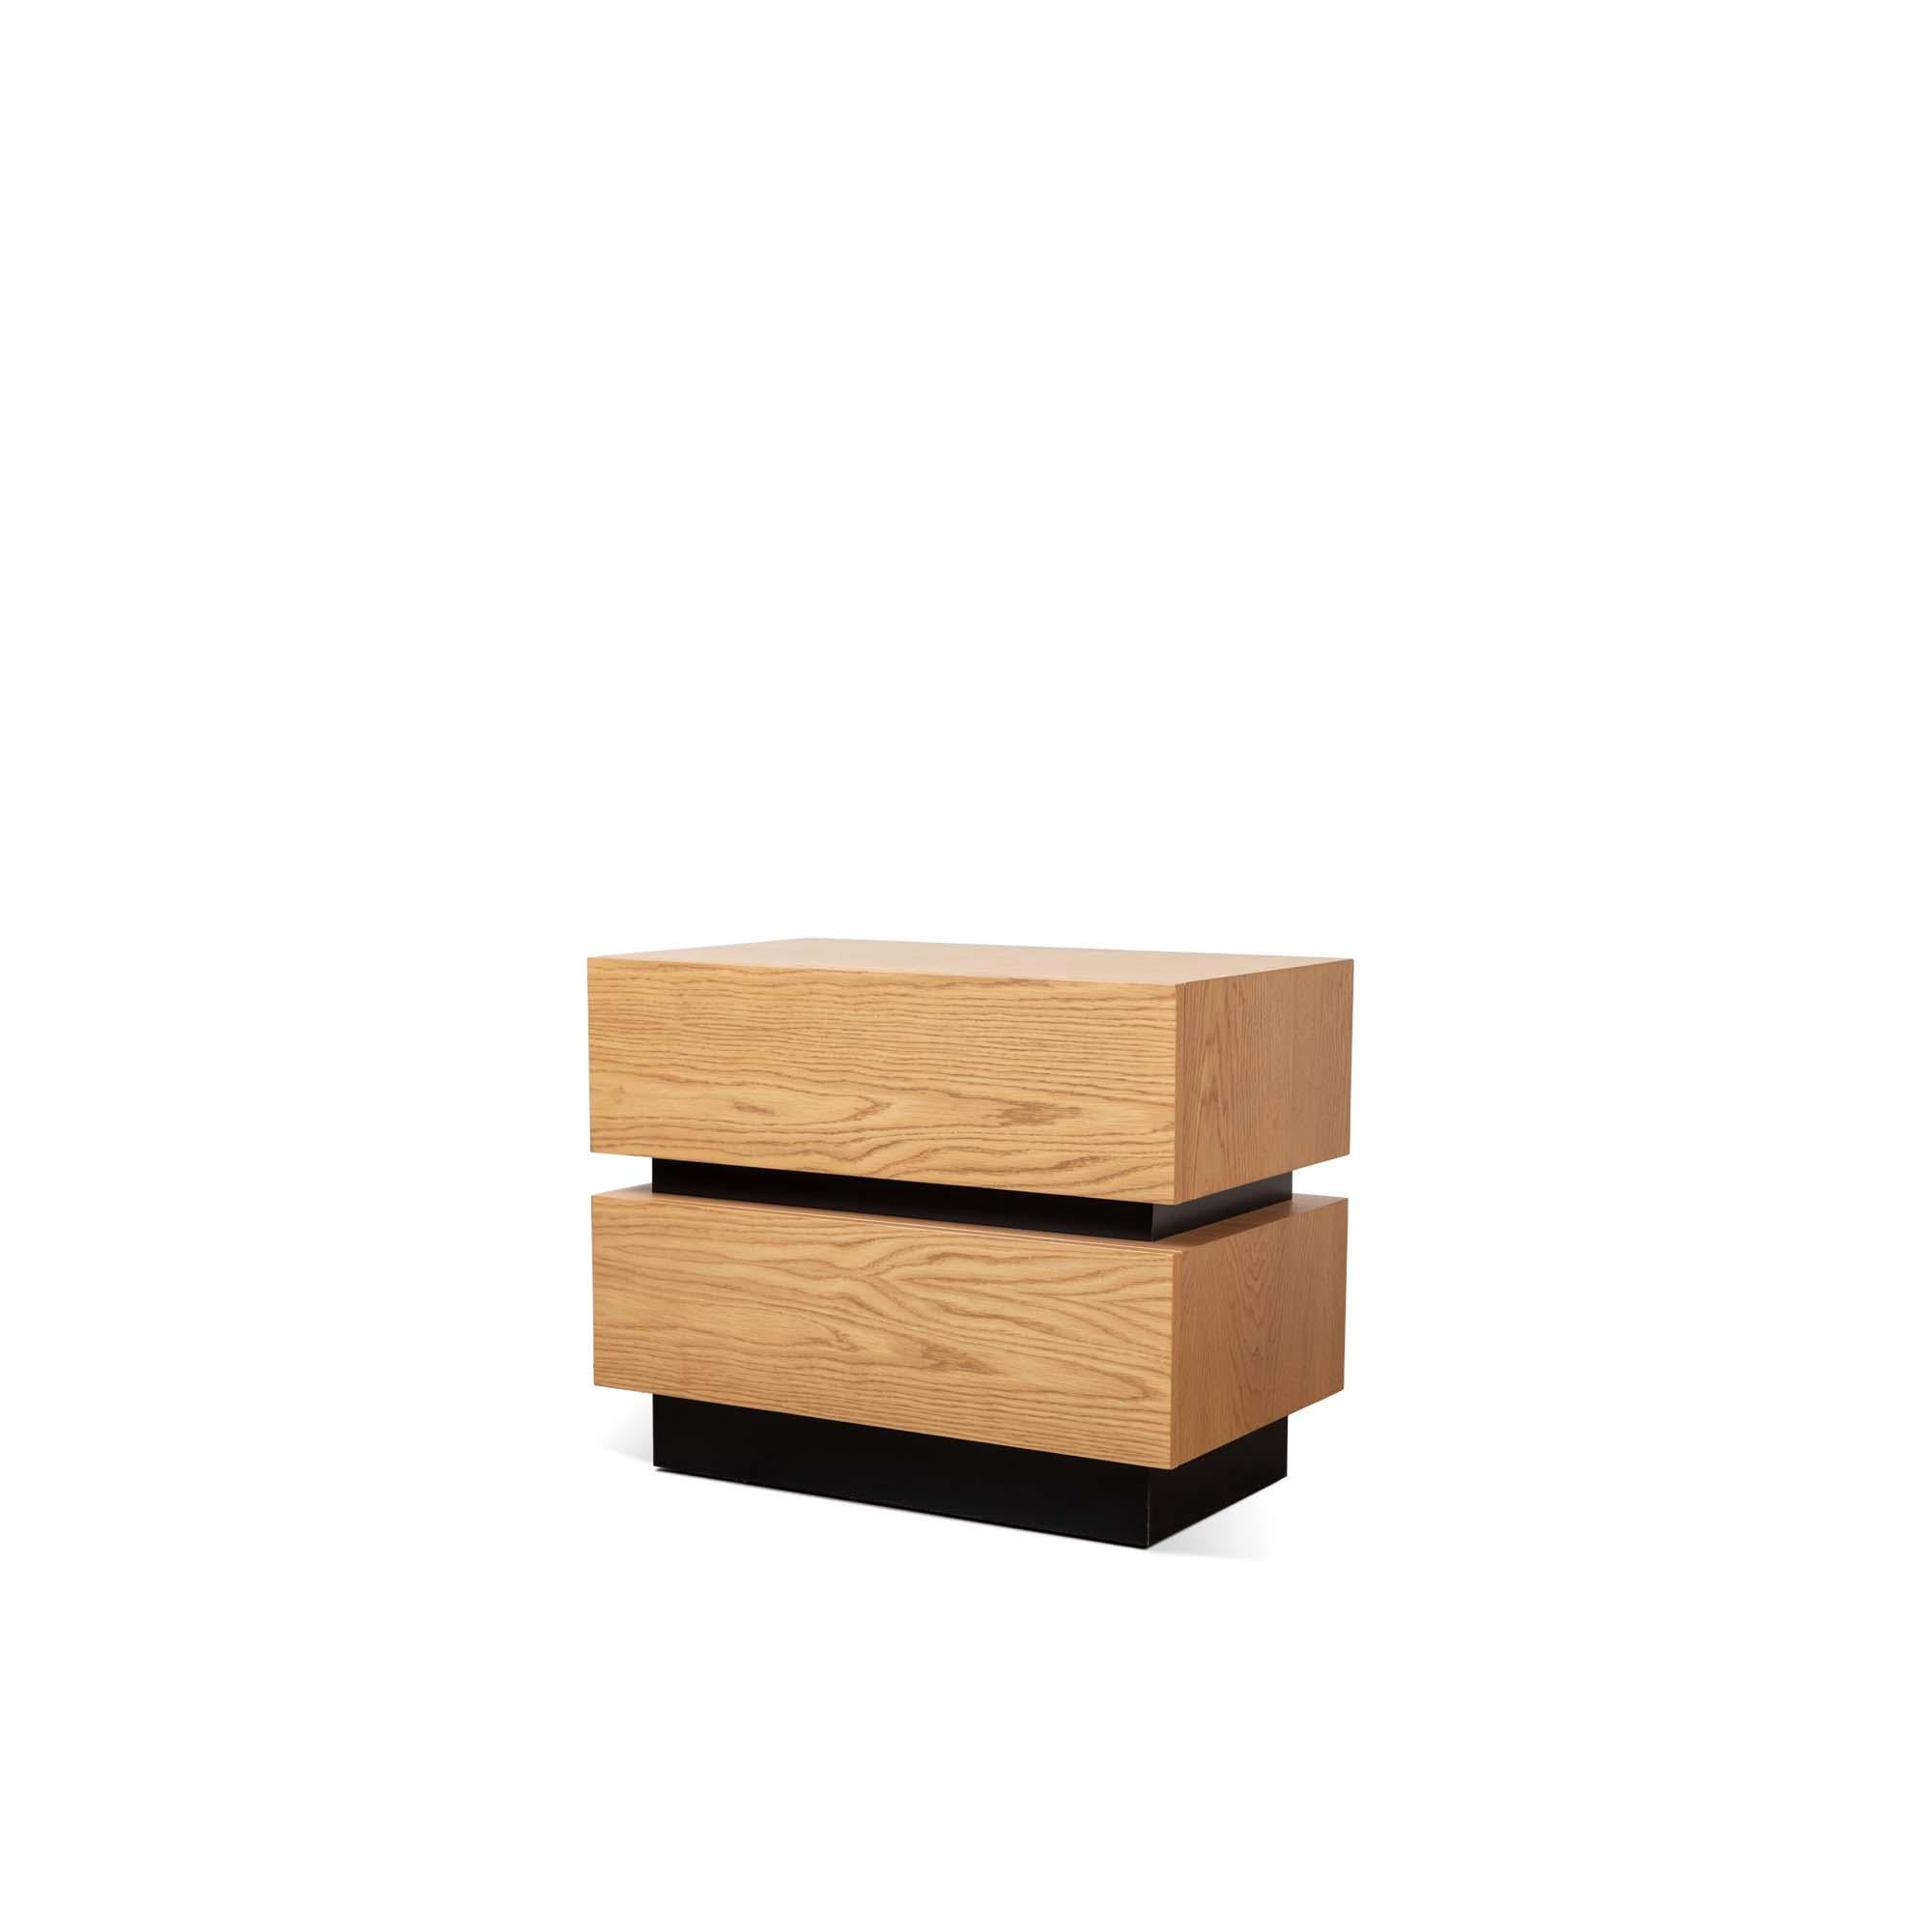 The stacked box nightstand with Metal Inset is a bedside table with two drawers that is available in either American walnut, or white oak and features a metal inset detail between the drawers. Available in two sizes. 

The Lawson-Fenning